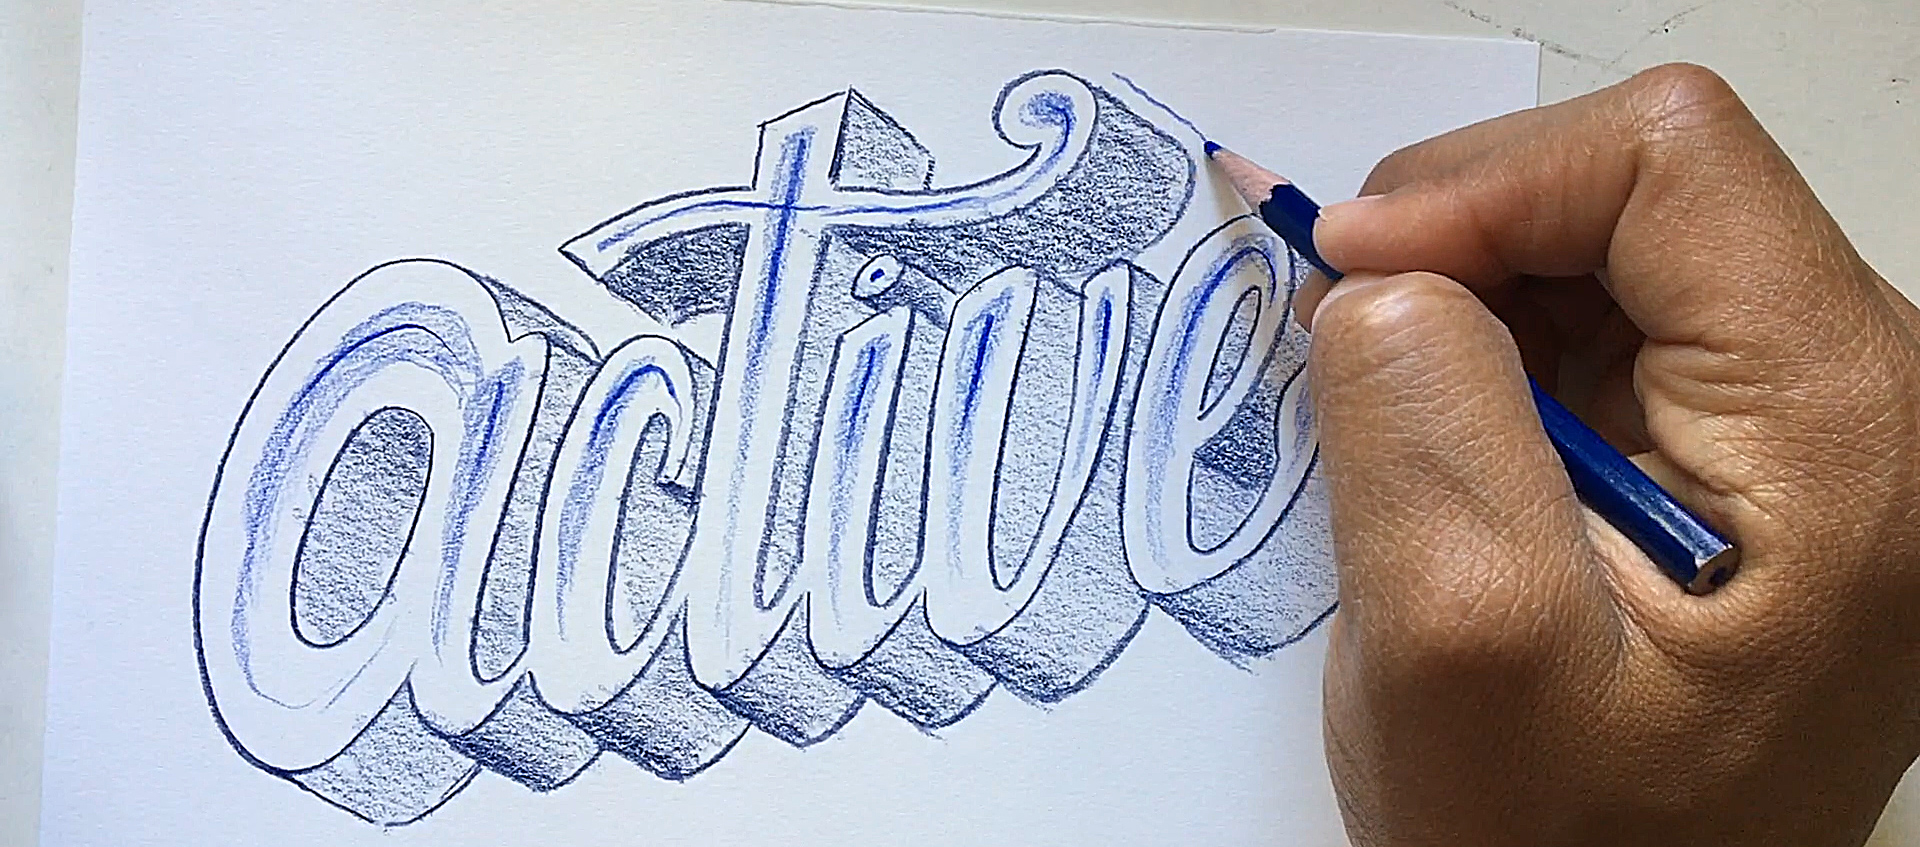 The hand of artist and author Robert Liu-Trujillo drawing a decorative treatment of the word "active"